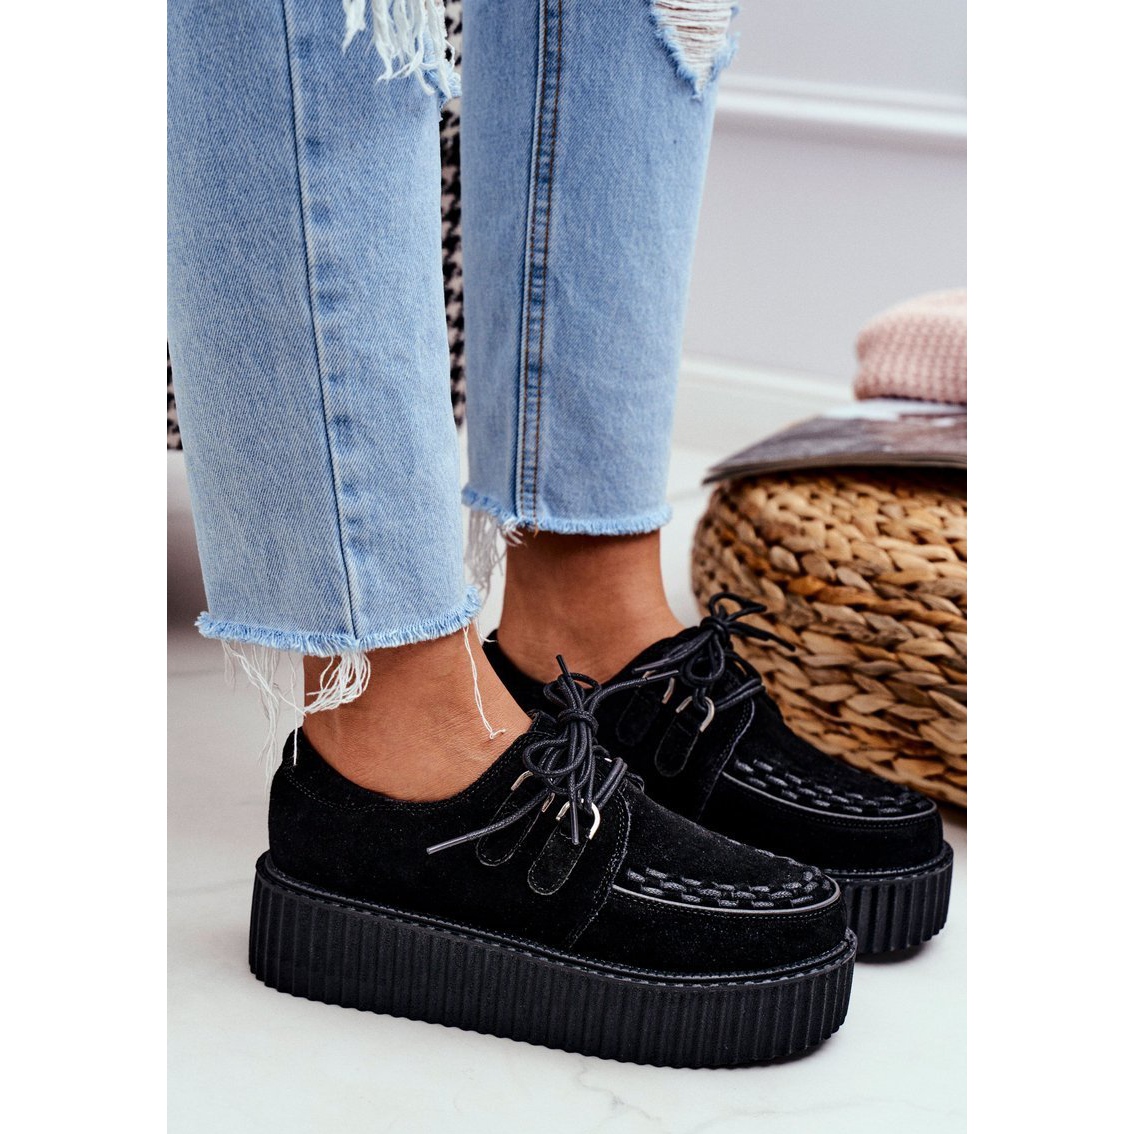 Smith's Black Suede Creepers on the Gocain Platform